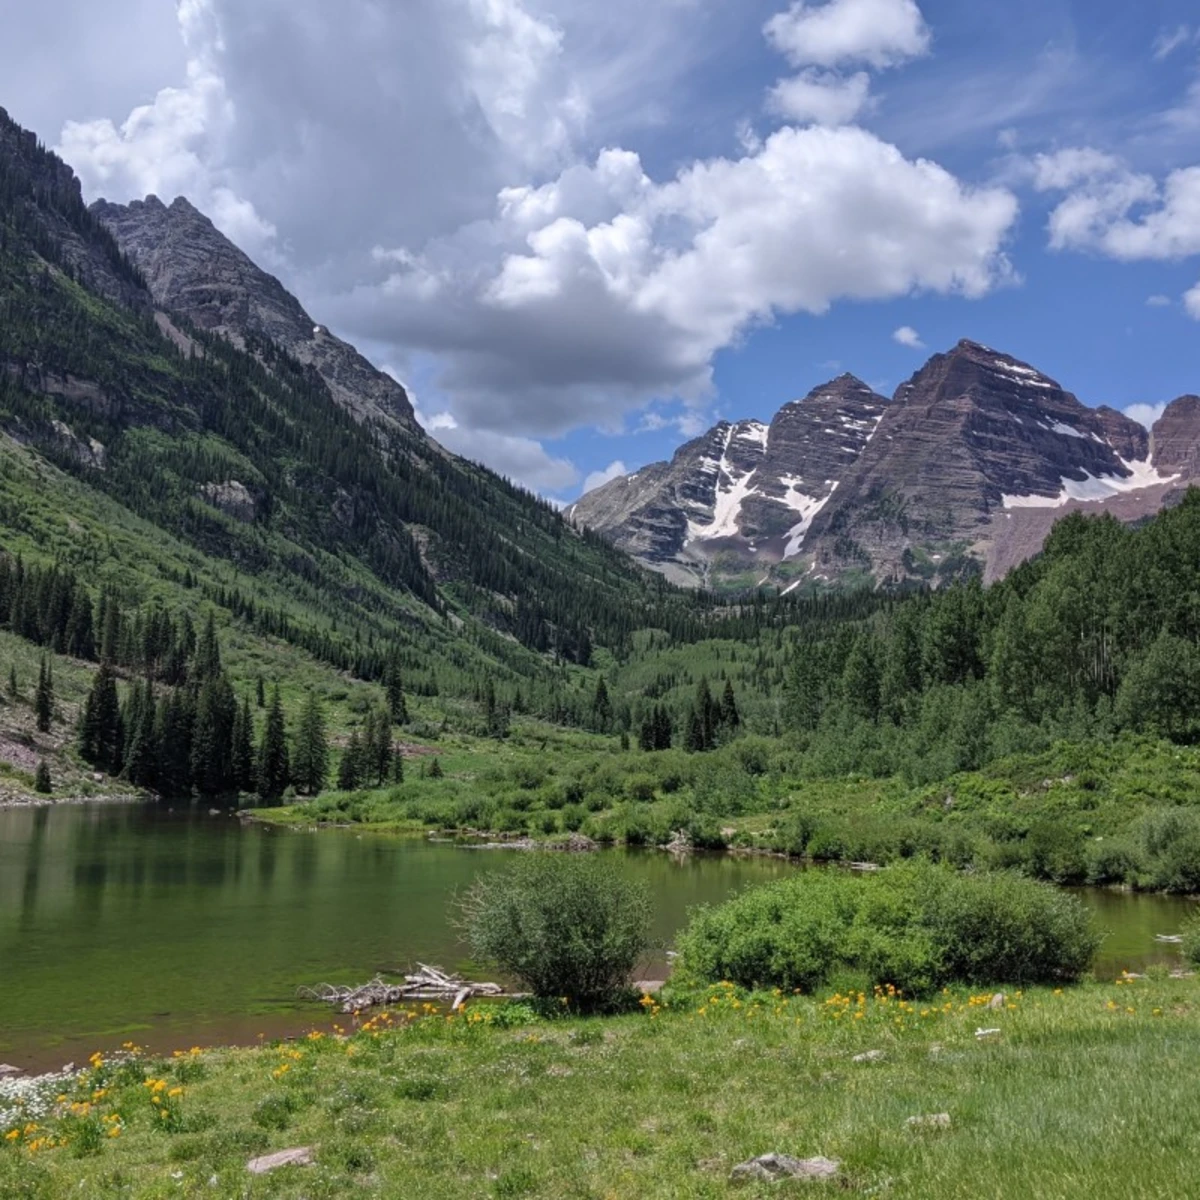 lake in an alpine valley amid a rocky peak